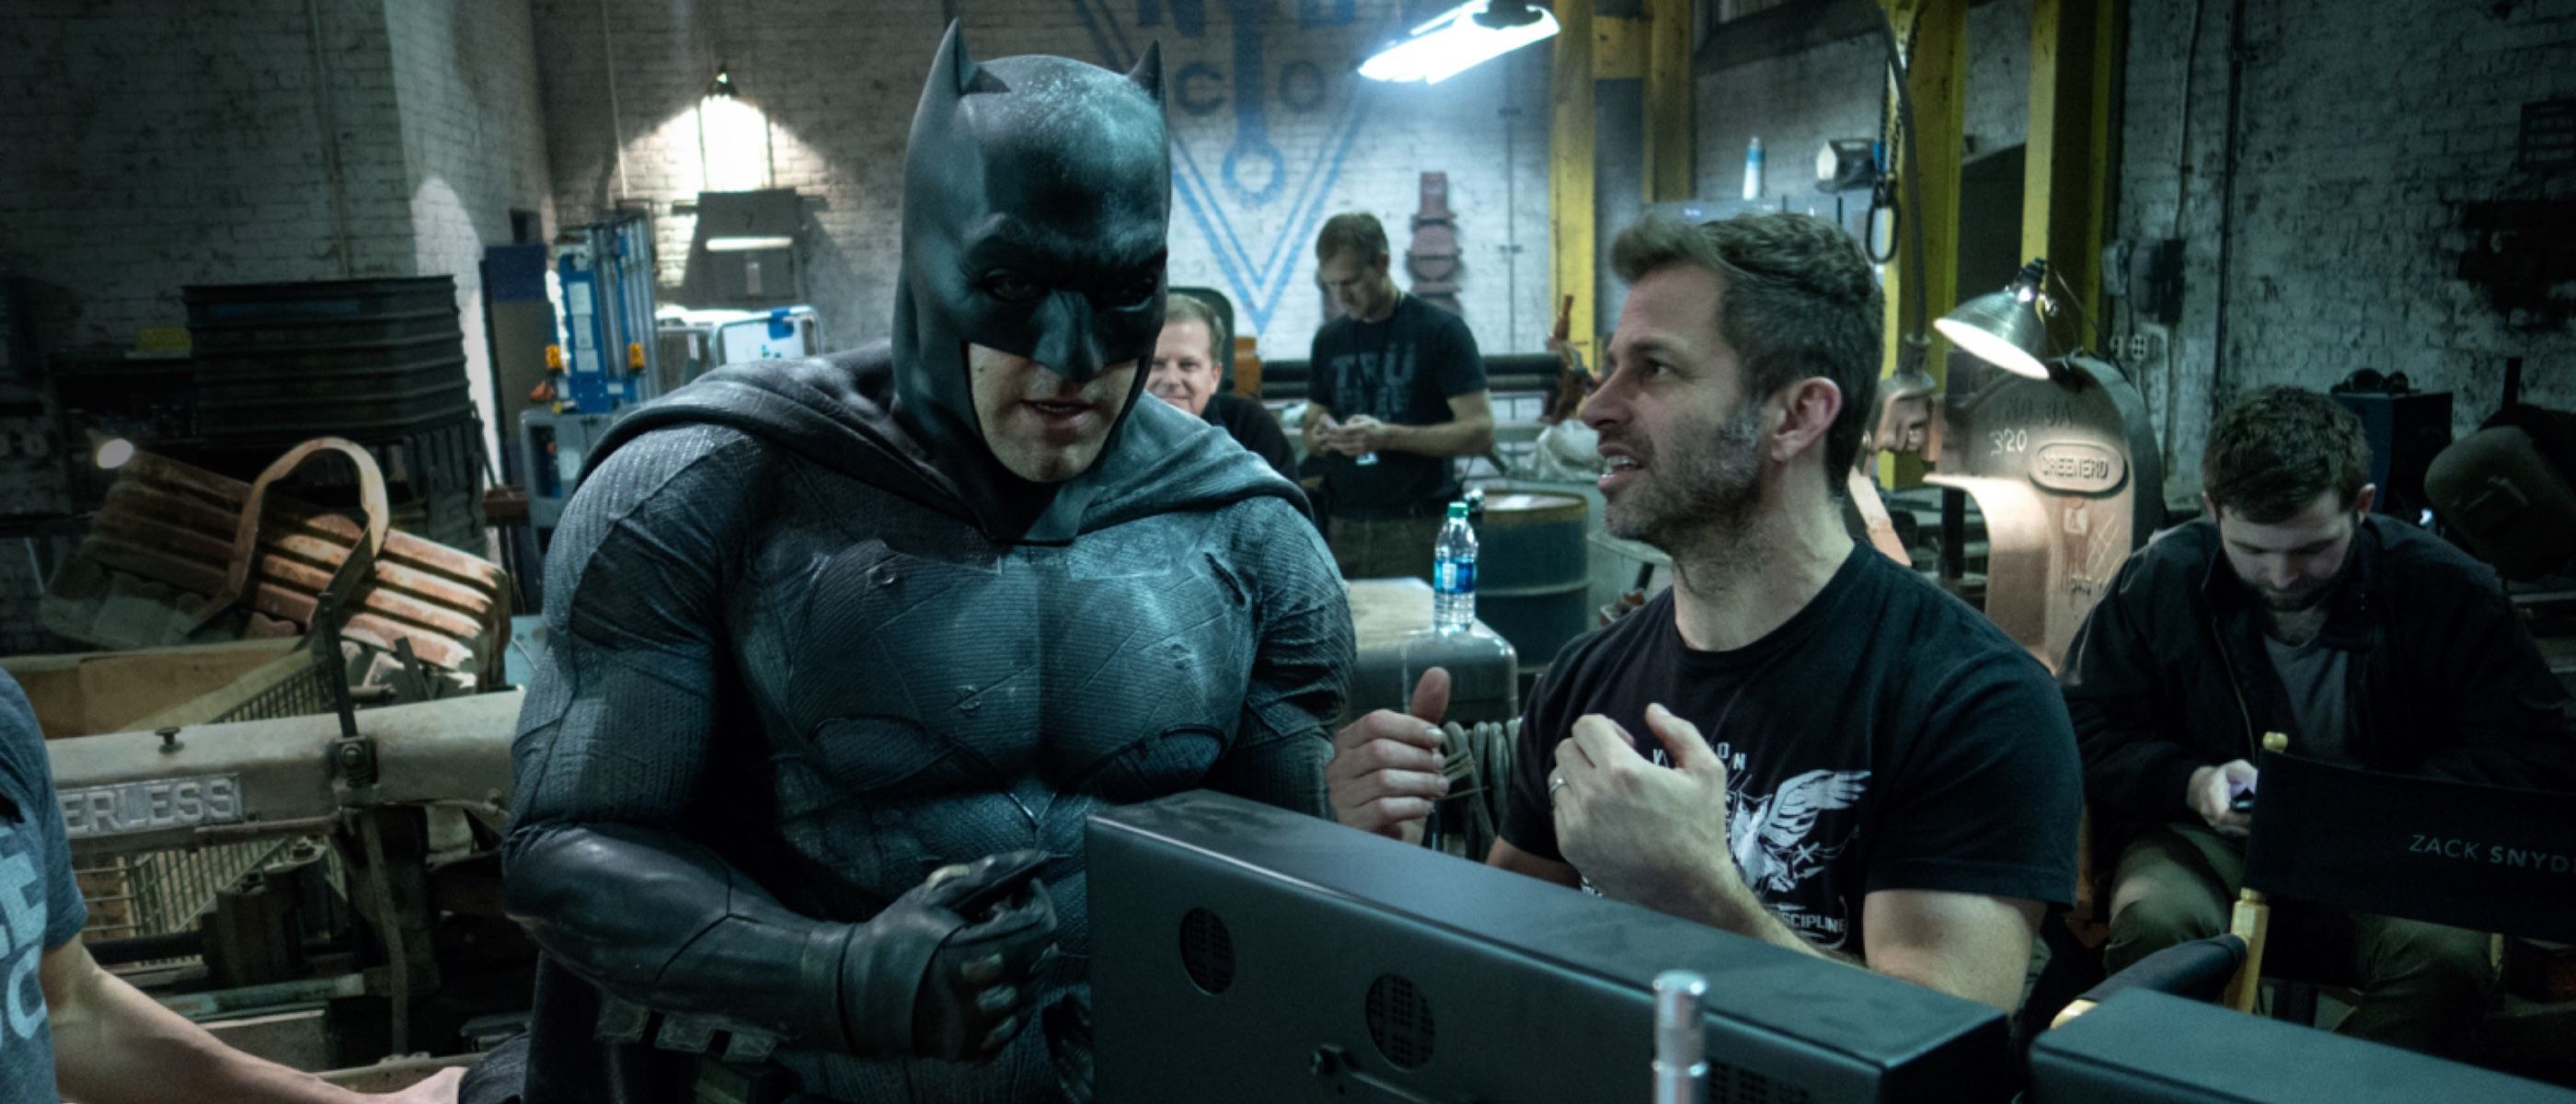 Justice League Zack Snyder Cut Doesn't Exist, Batman's Alternate Intro Scene, and More